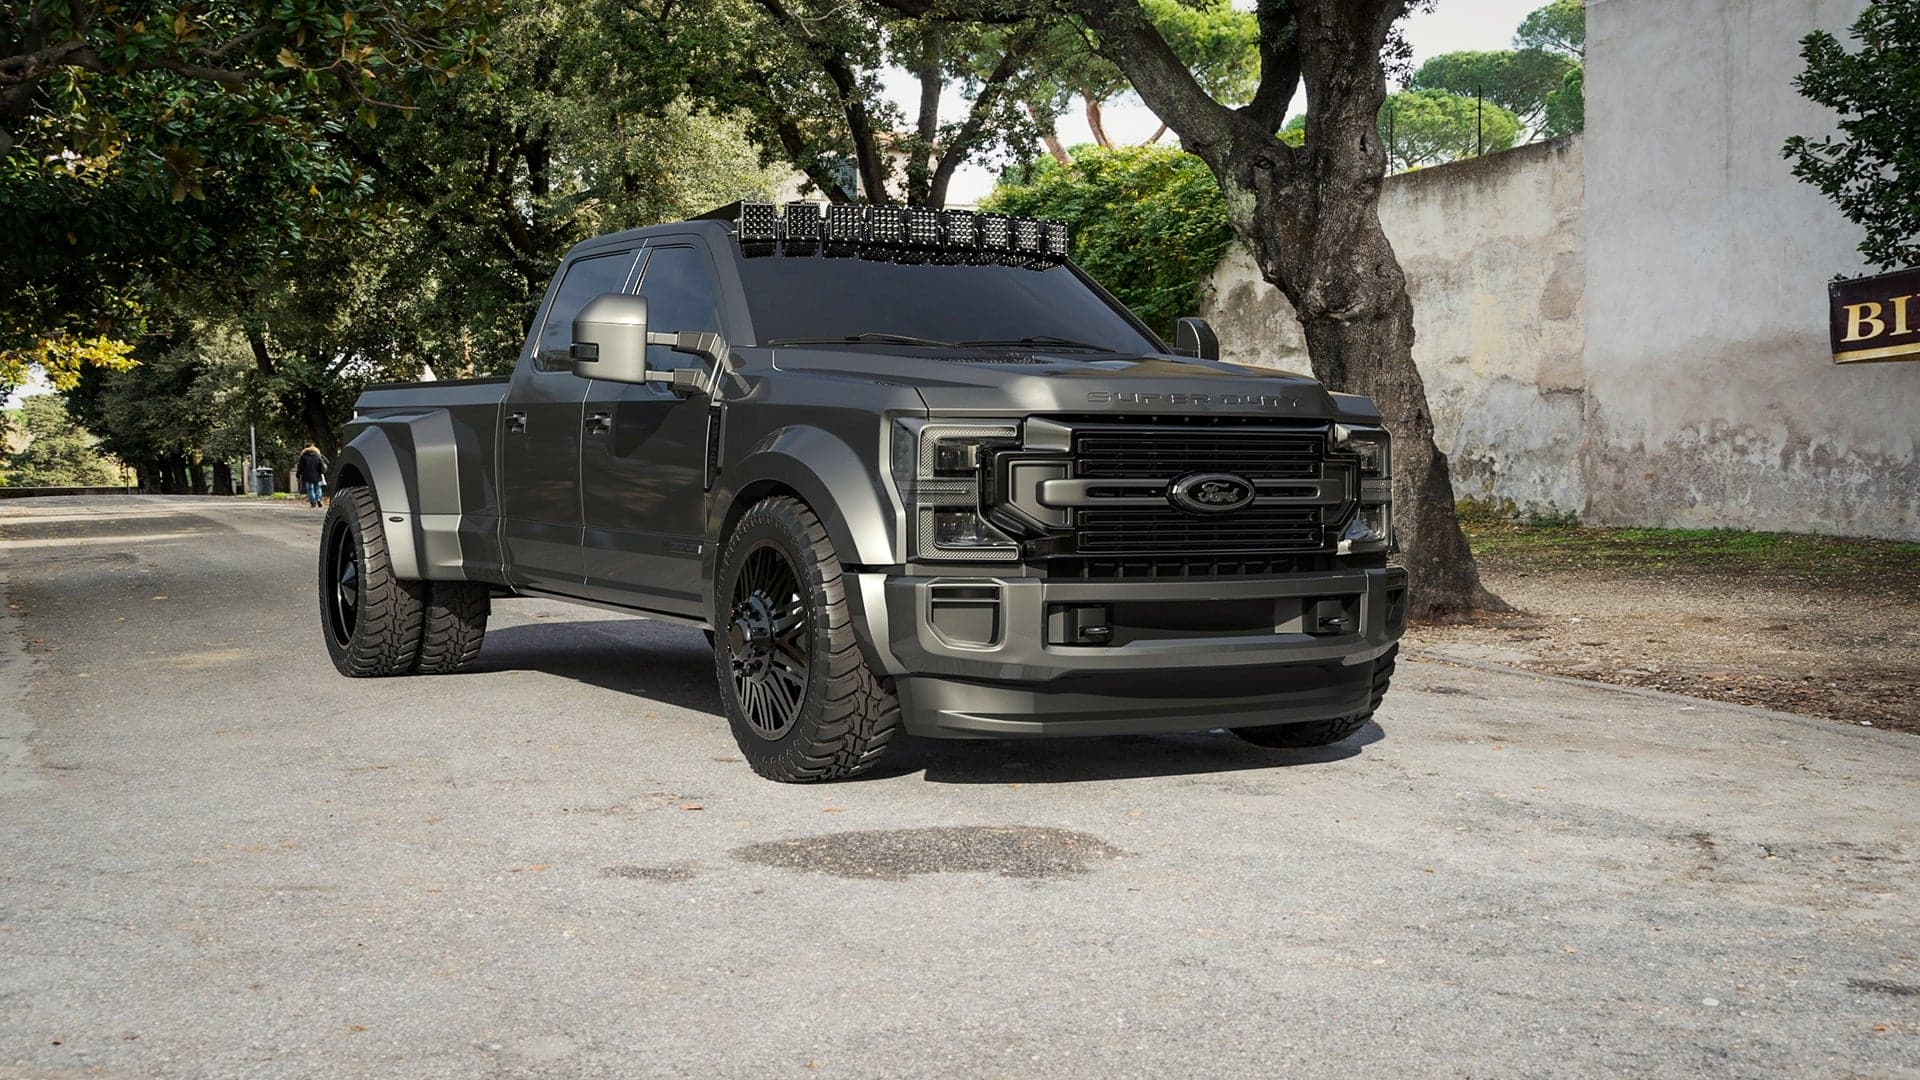 Ford Goes All-Out With These 5 Custom 2020 Super Duty Trucks at SEMA